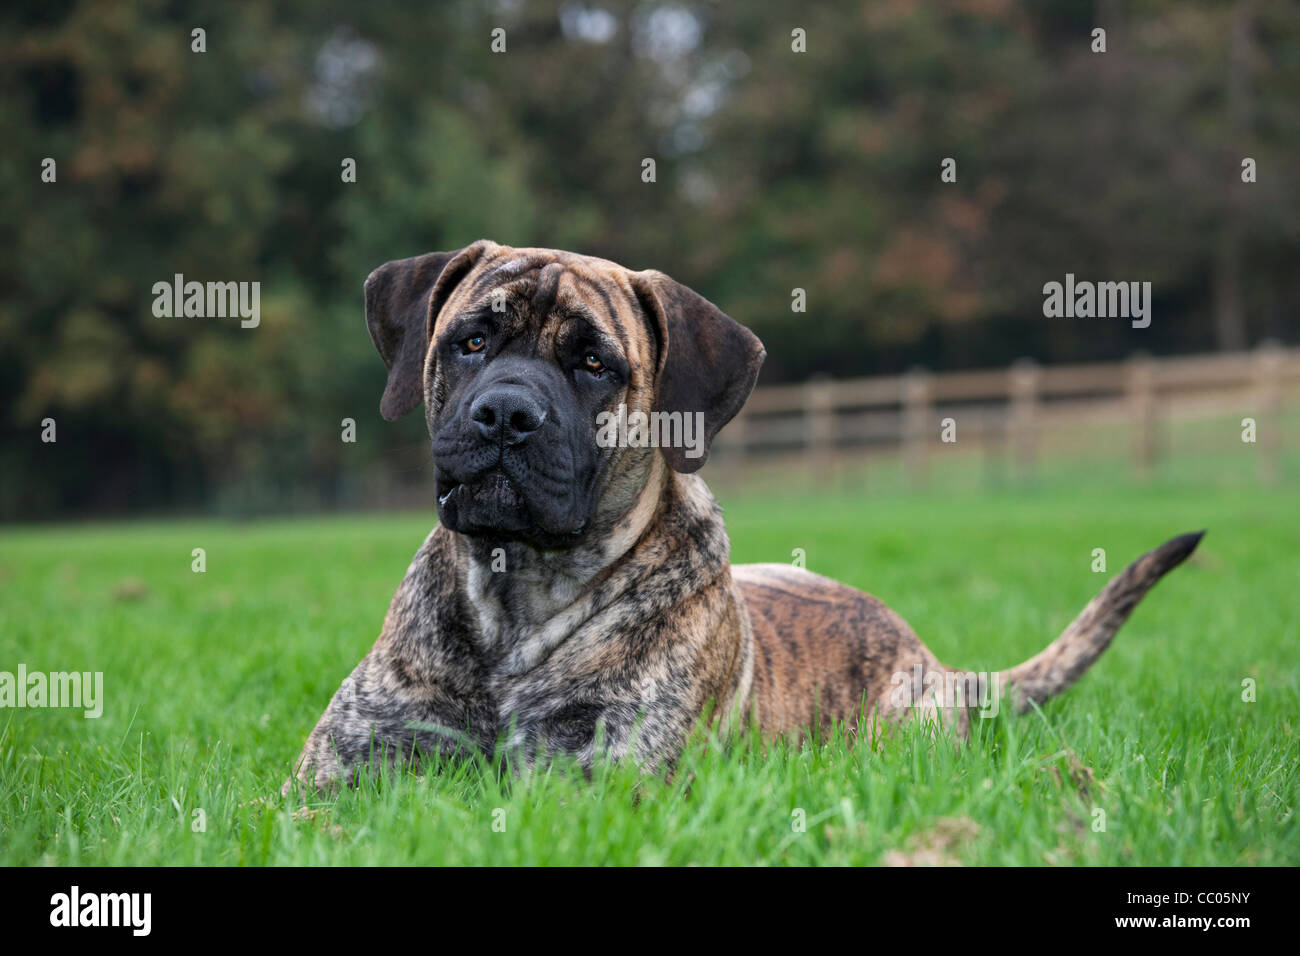 Boerboel, mastiff dog breed from South Africa Stock Photo